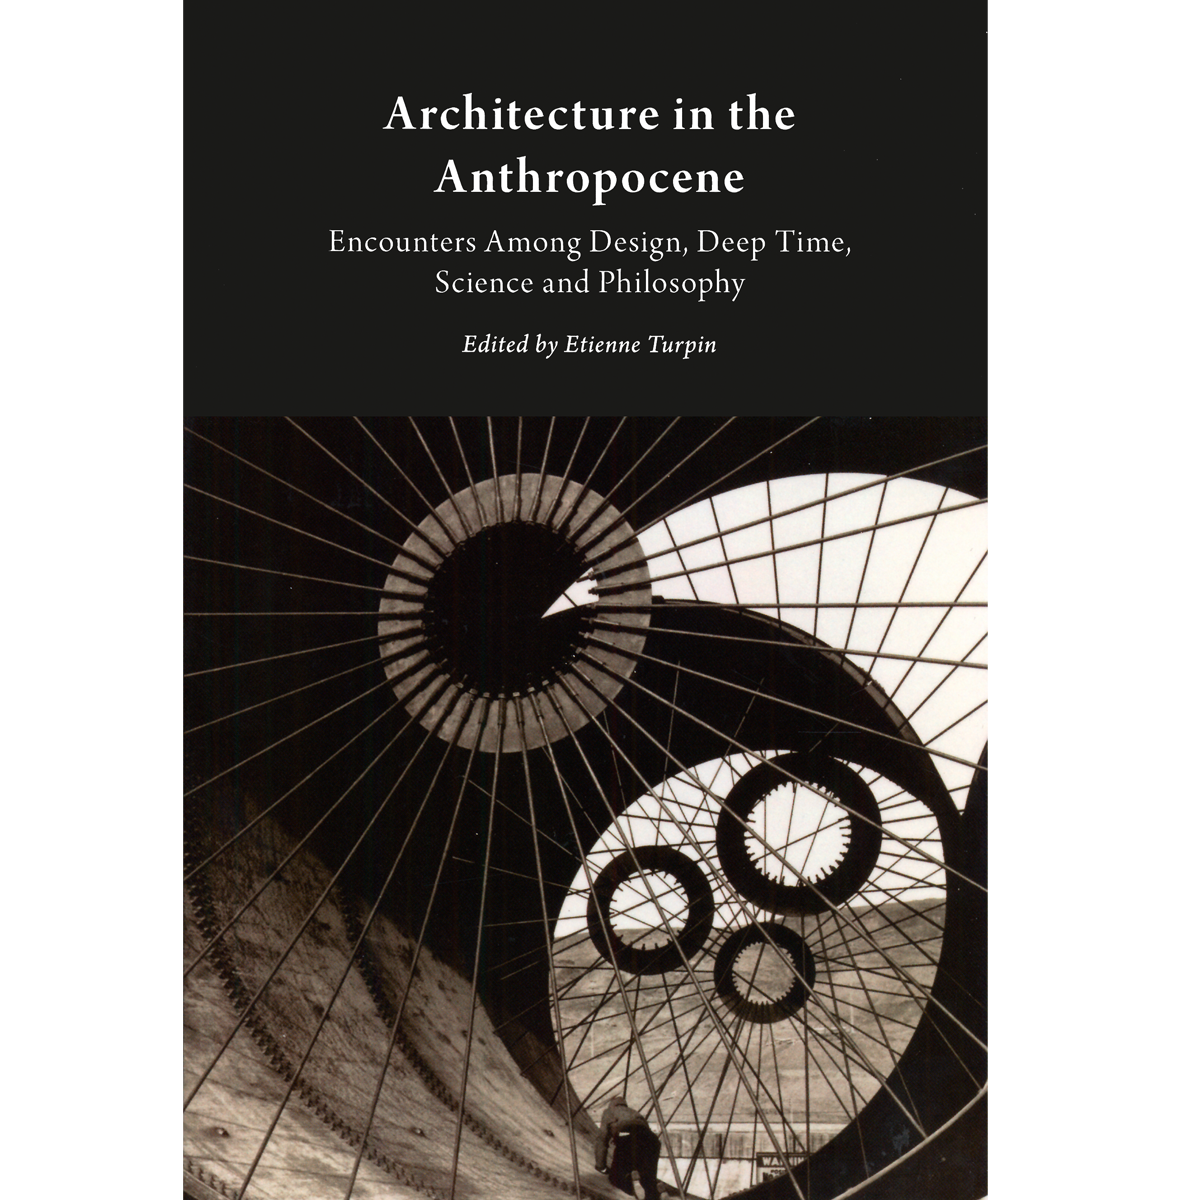 Architecture in the Anthropocene